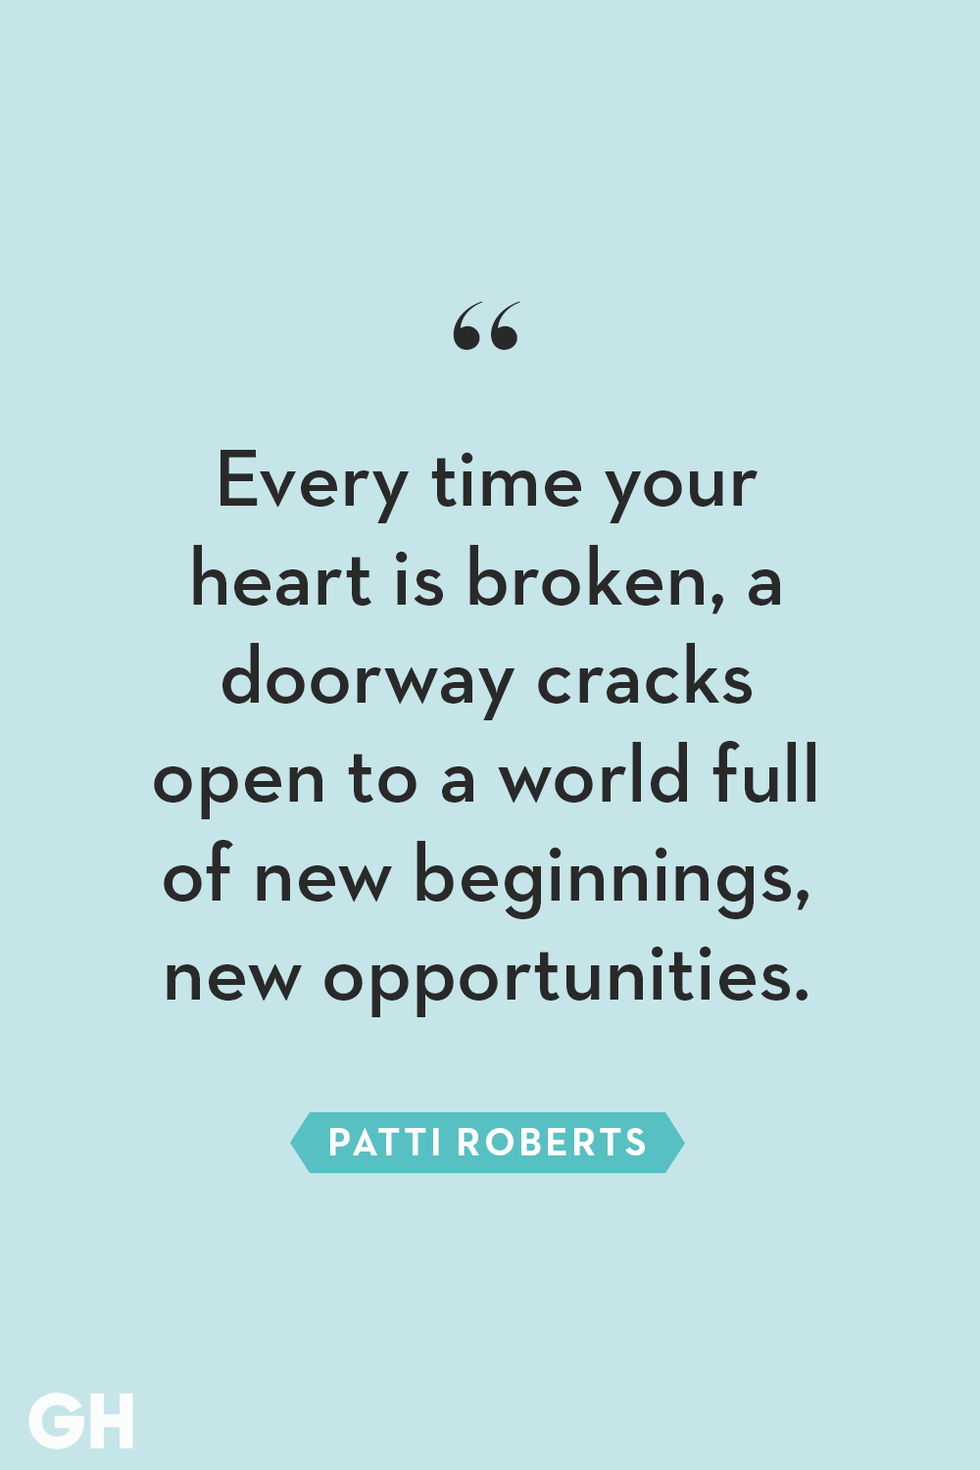 51 Broken Heart Quotes to Mend Your Heart and Help You Move Forward